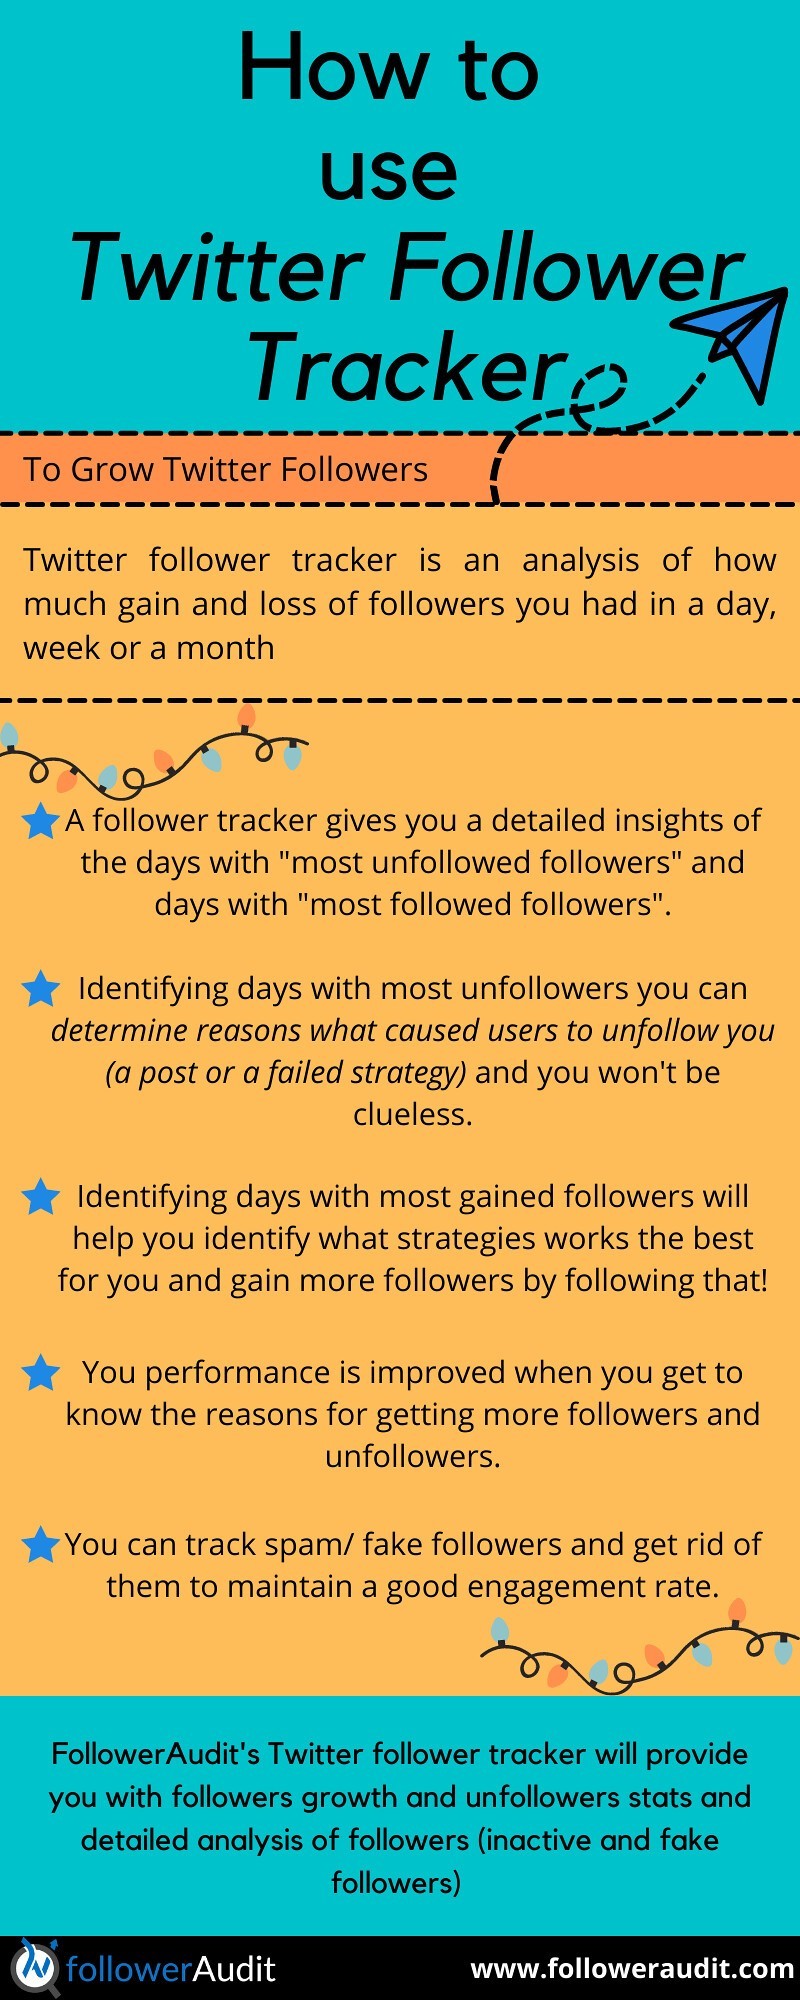 How to use Twitter Follower Tracker